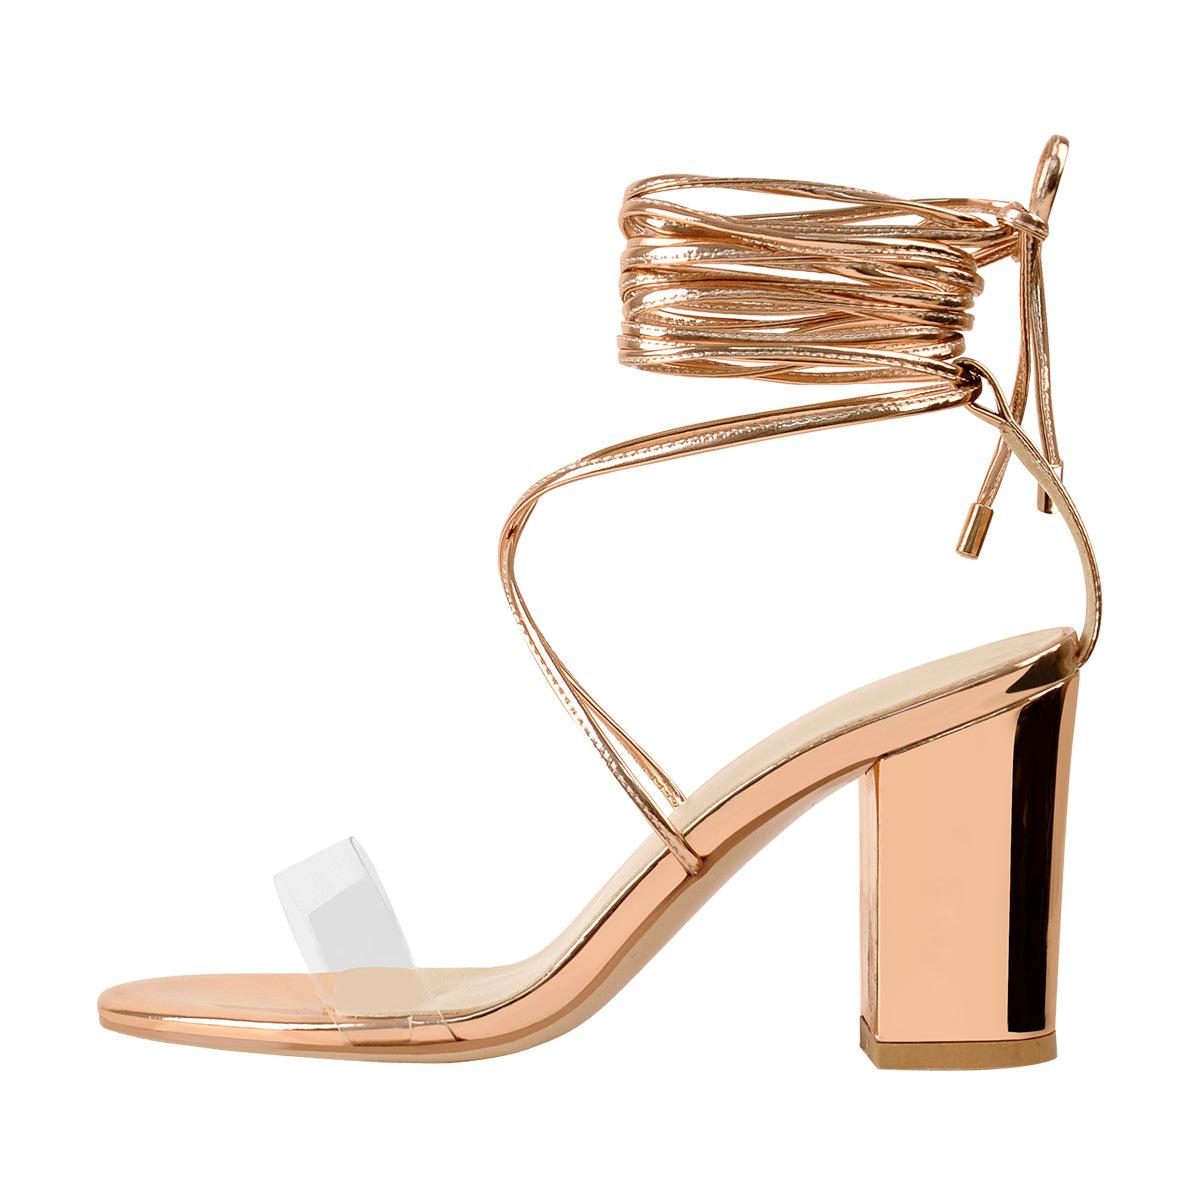 Ankle strap chunky heels sandals